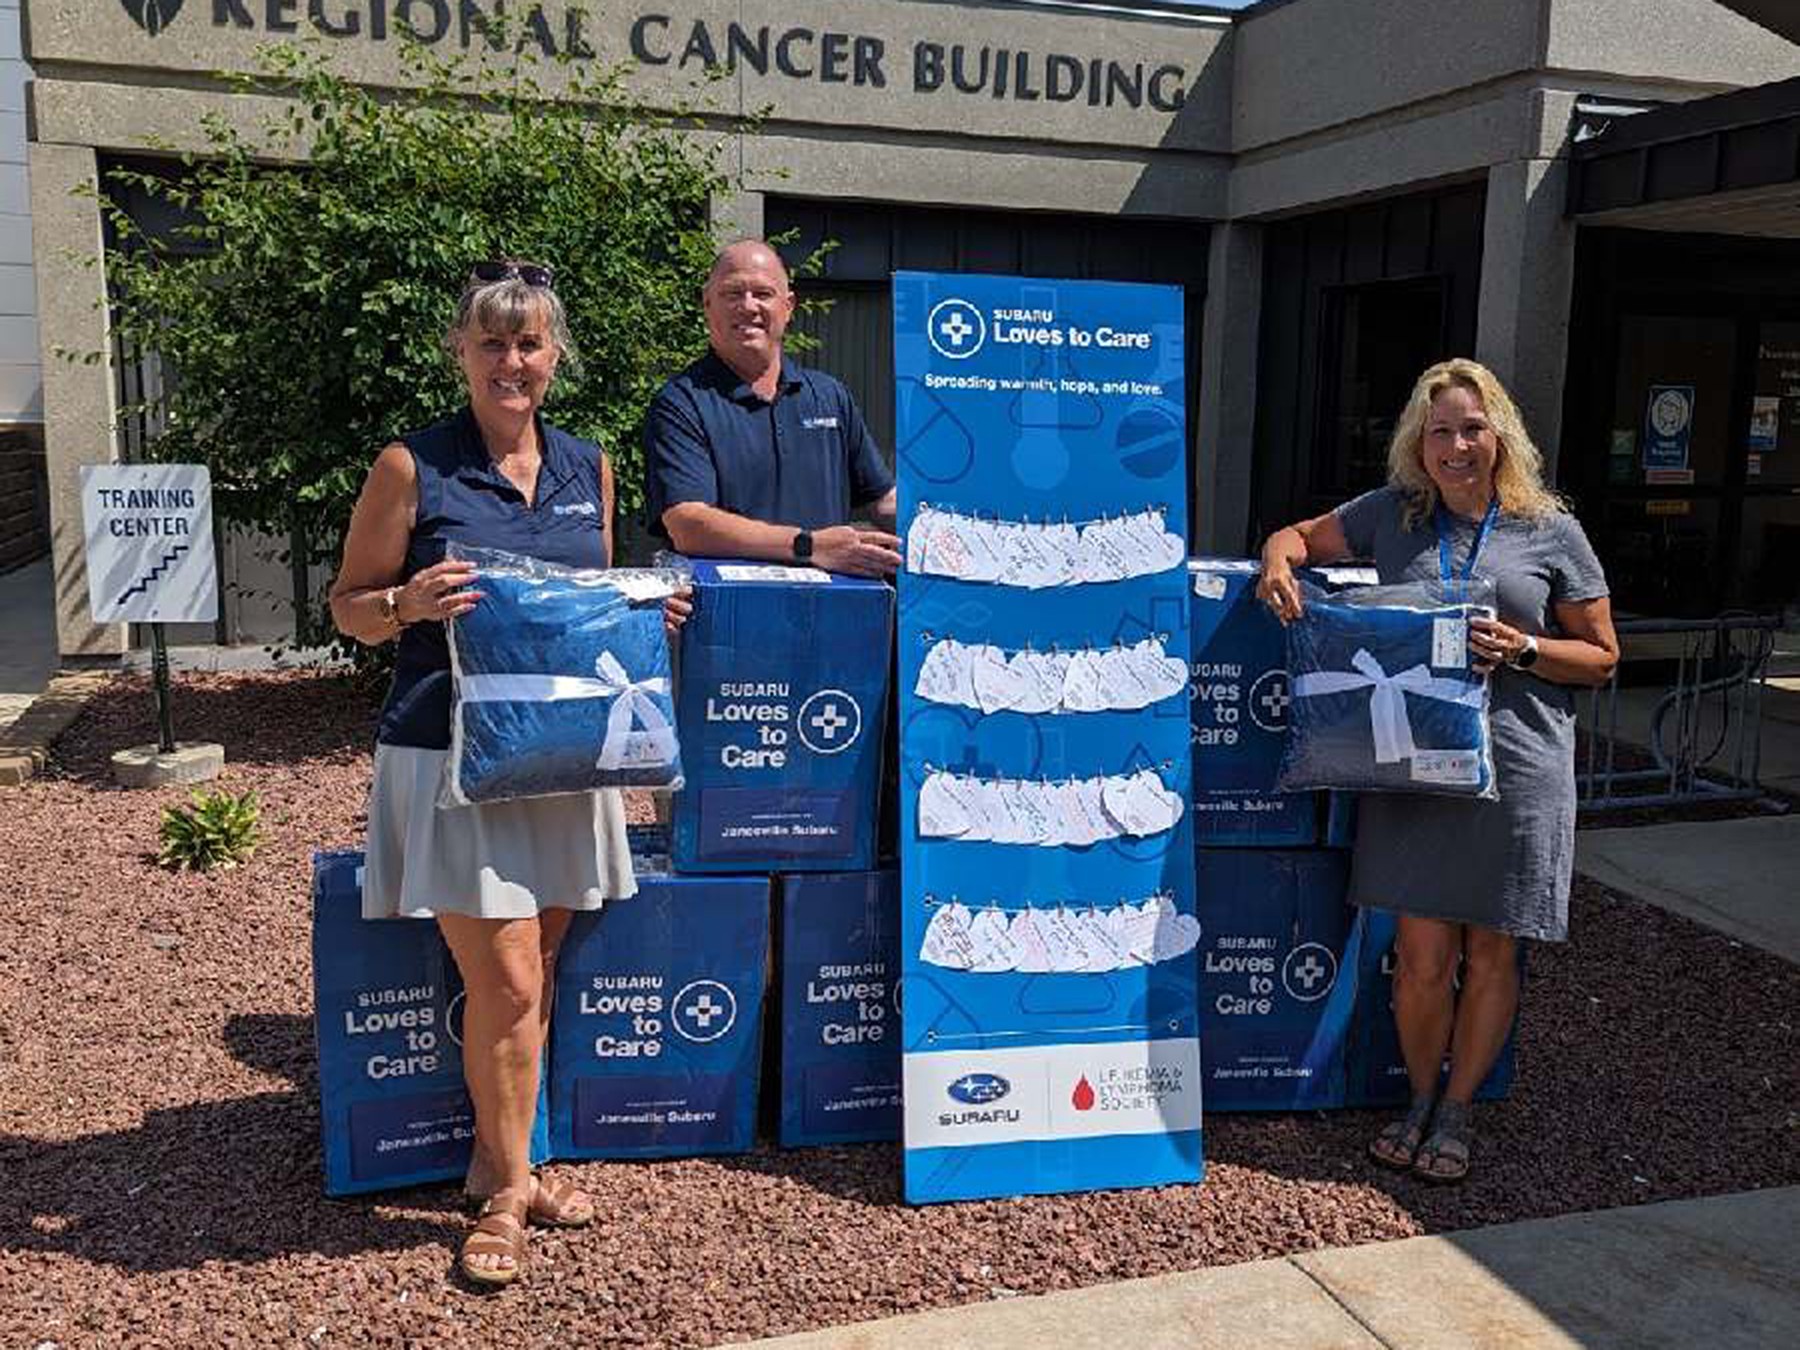 Mercyhealth Cancer Center was a recipient of this year's Subaru Loves to Care initiative, a charitable arm of the Subaru Love Promise, spreading love, hope and warmth to cancer patients in our own hometown.